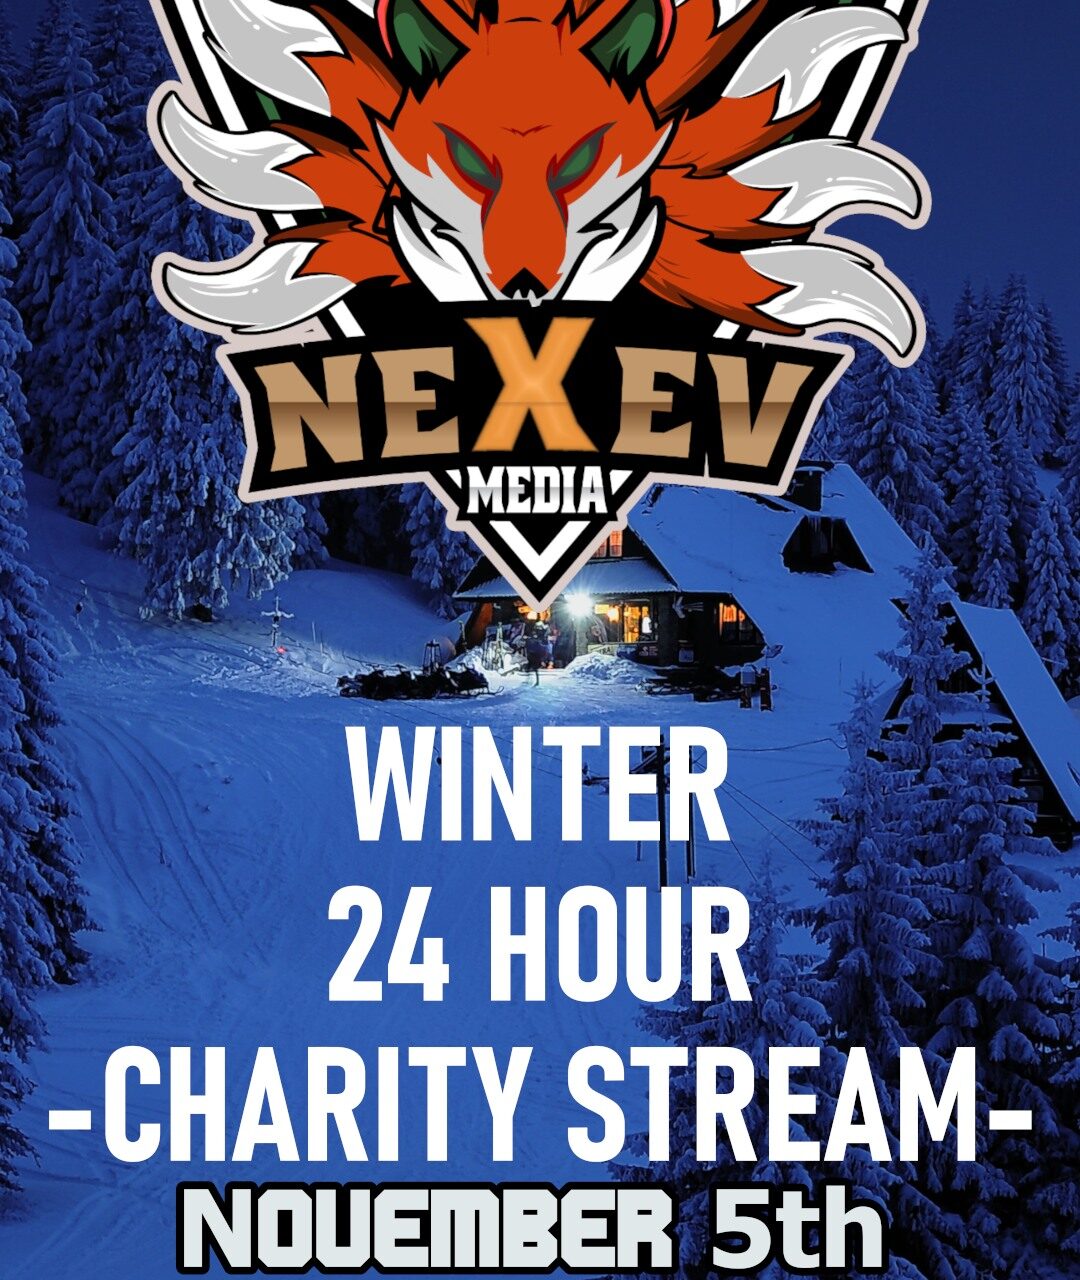 Nexev Does It For The Kids!